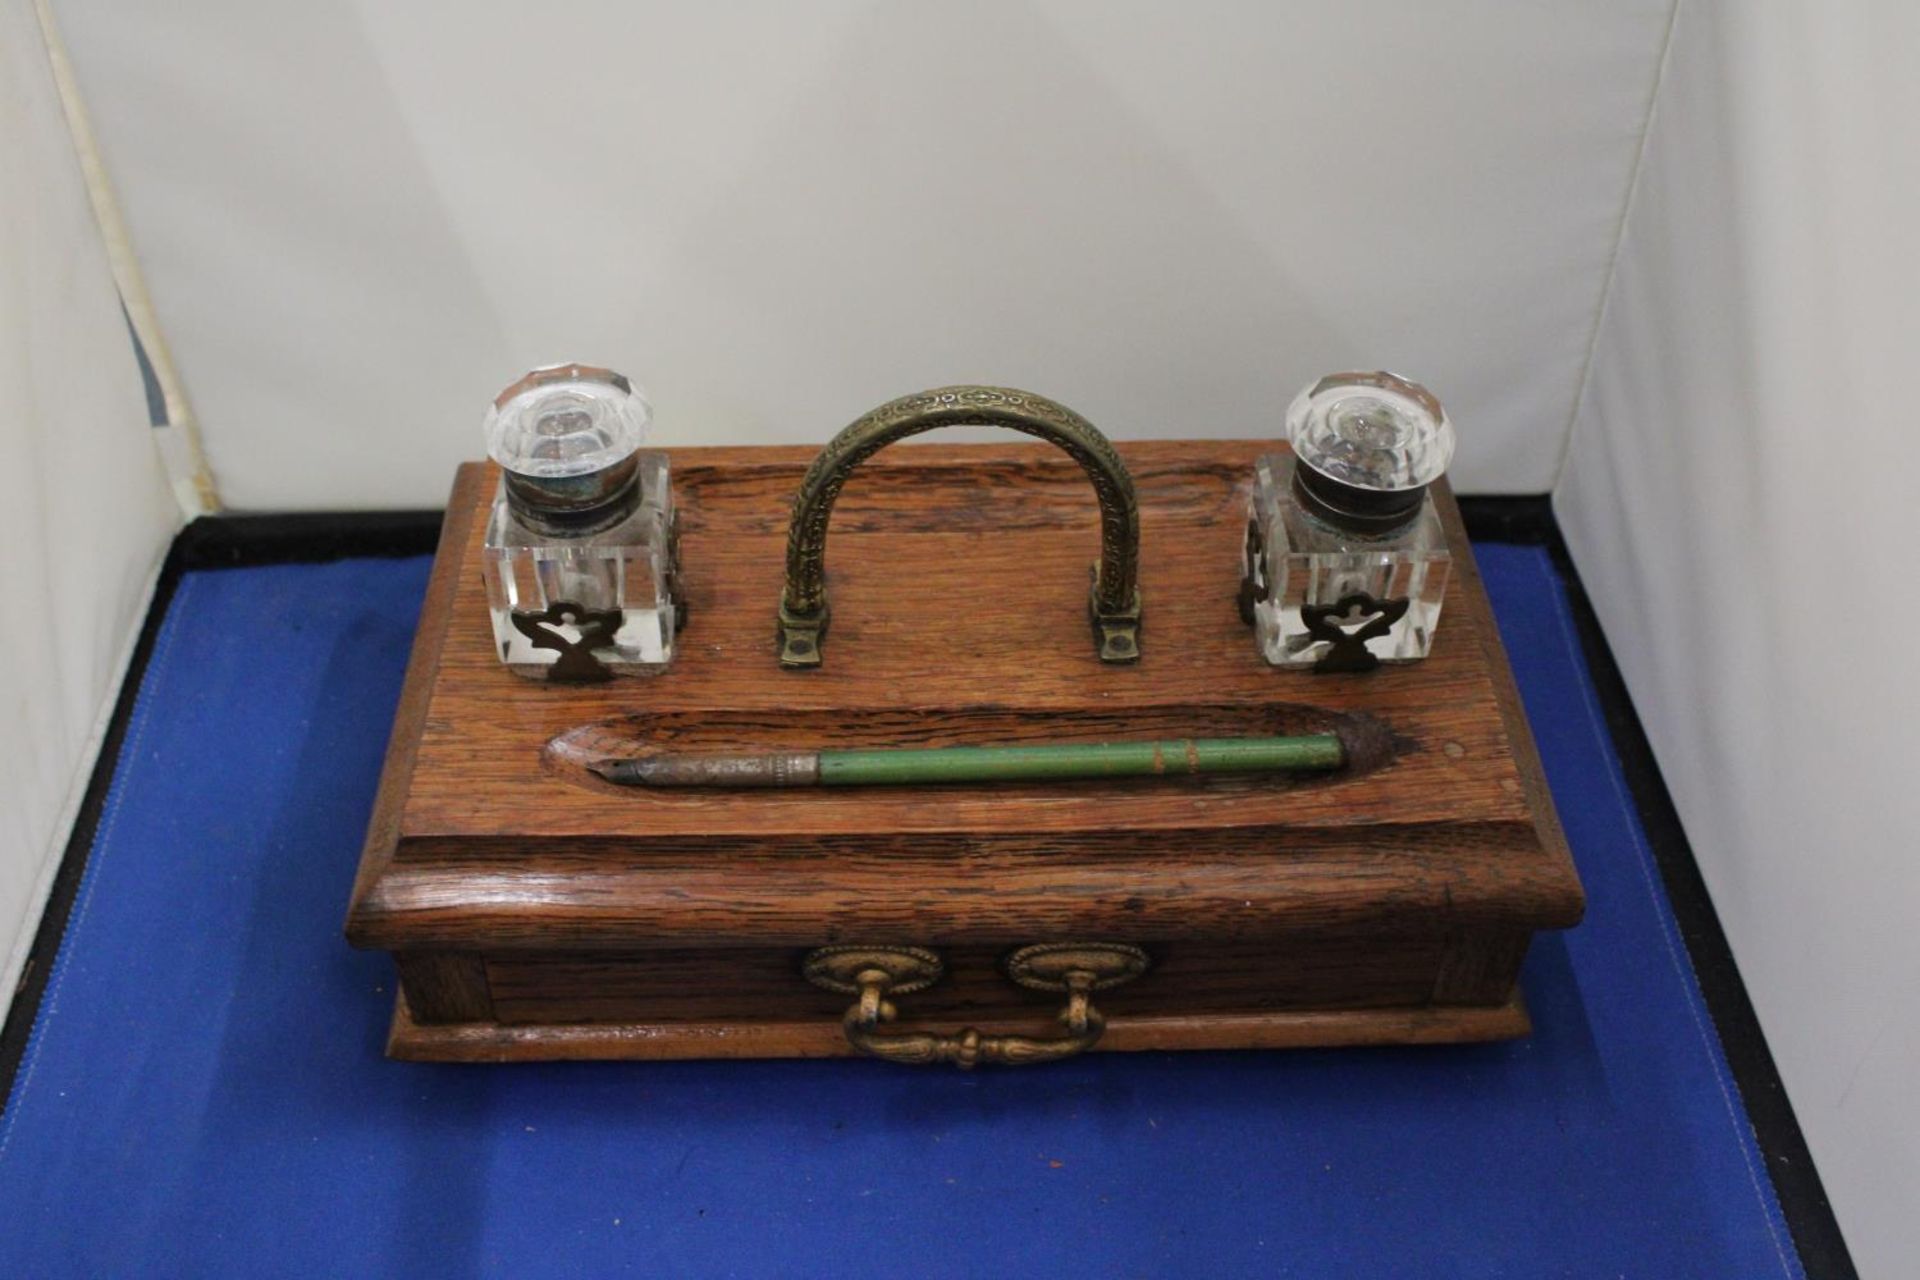 AN OAK INK WELL DESK SET WITH TWO GLASS BOTTLES, PEN AND DRAWER - Image 2 of 3